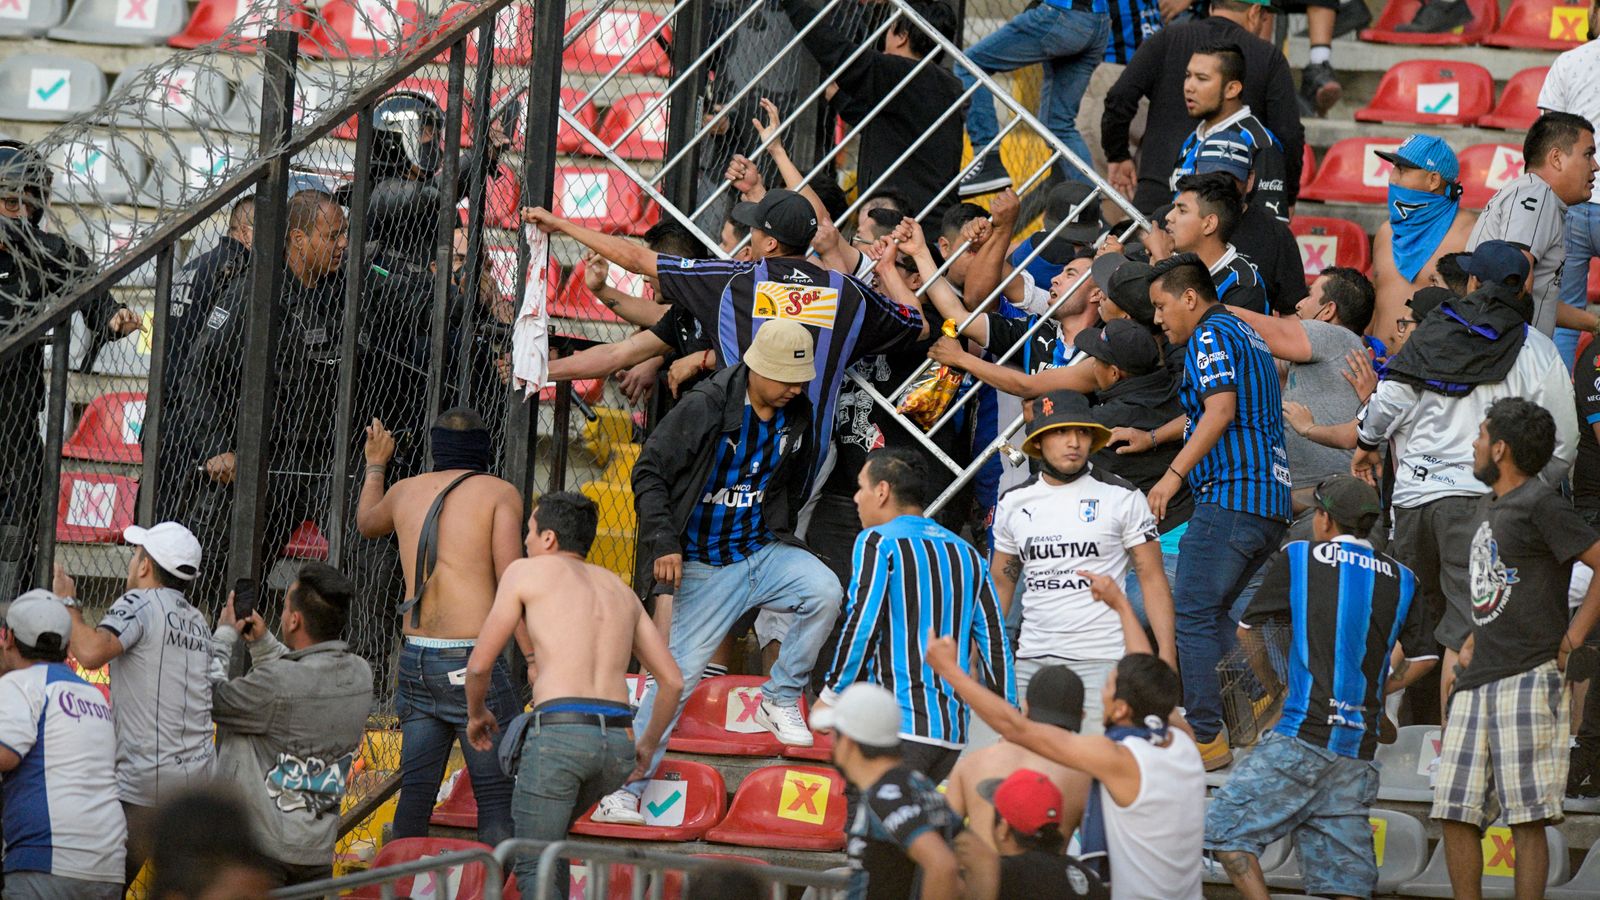 Football storm pitch in Mexico brawl breaks out | World | Sky News